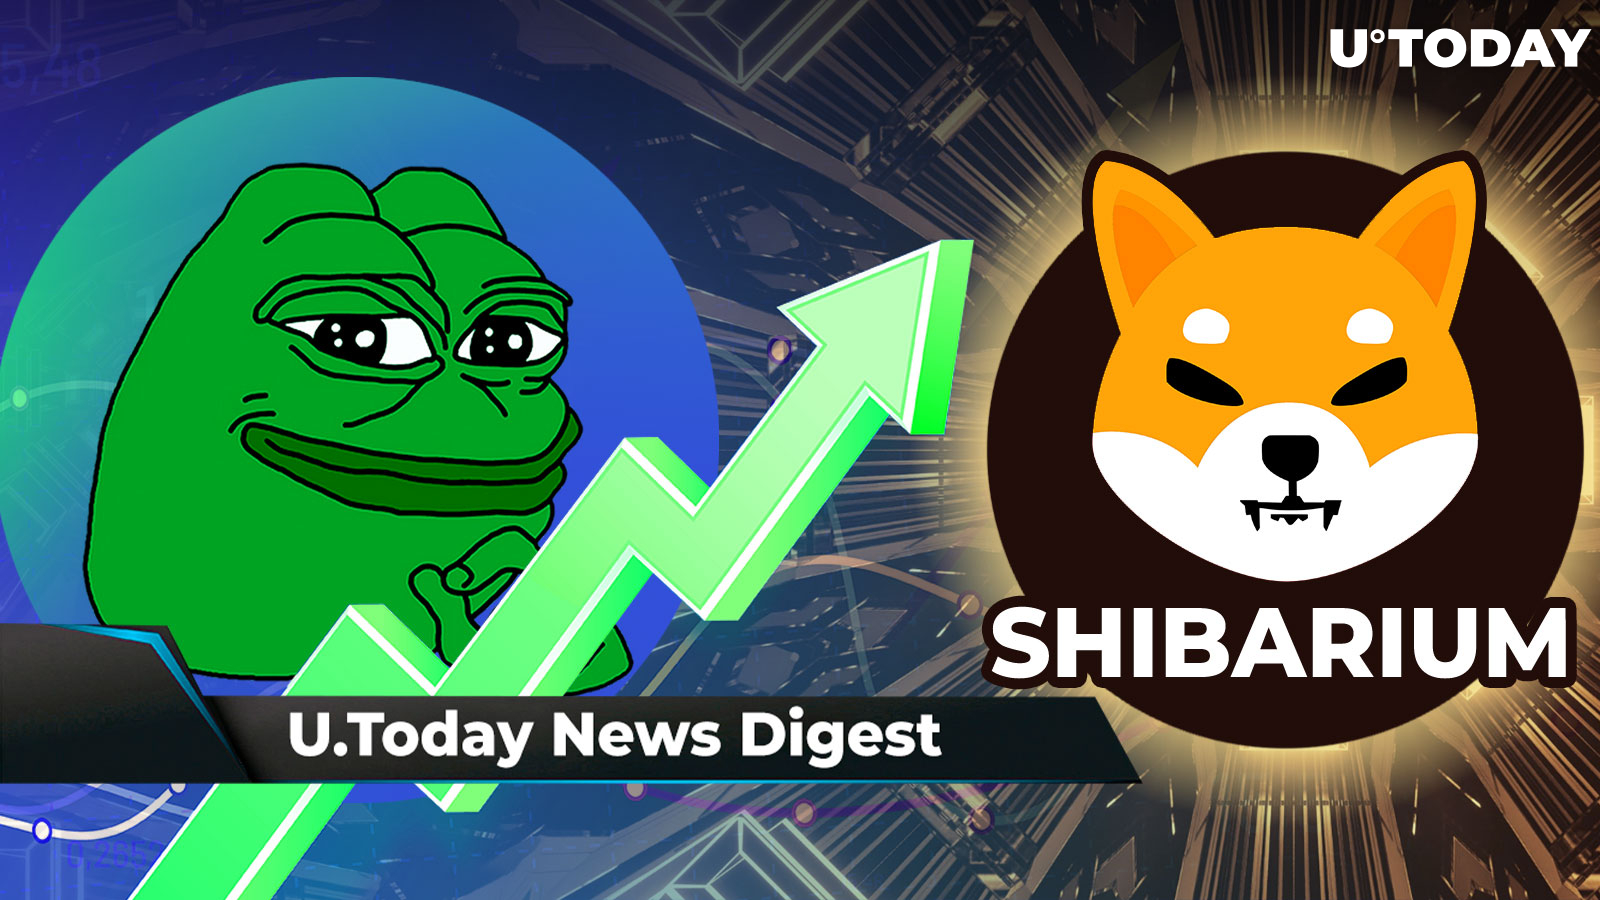 XRP Community Debates Timing of Ripple Lawsuit Summary Judgment, Shibarium Beta Hits Big Milestone, PEPE Outperforms DOGE and SHIB: Crypto News Digest by U.Today